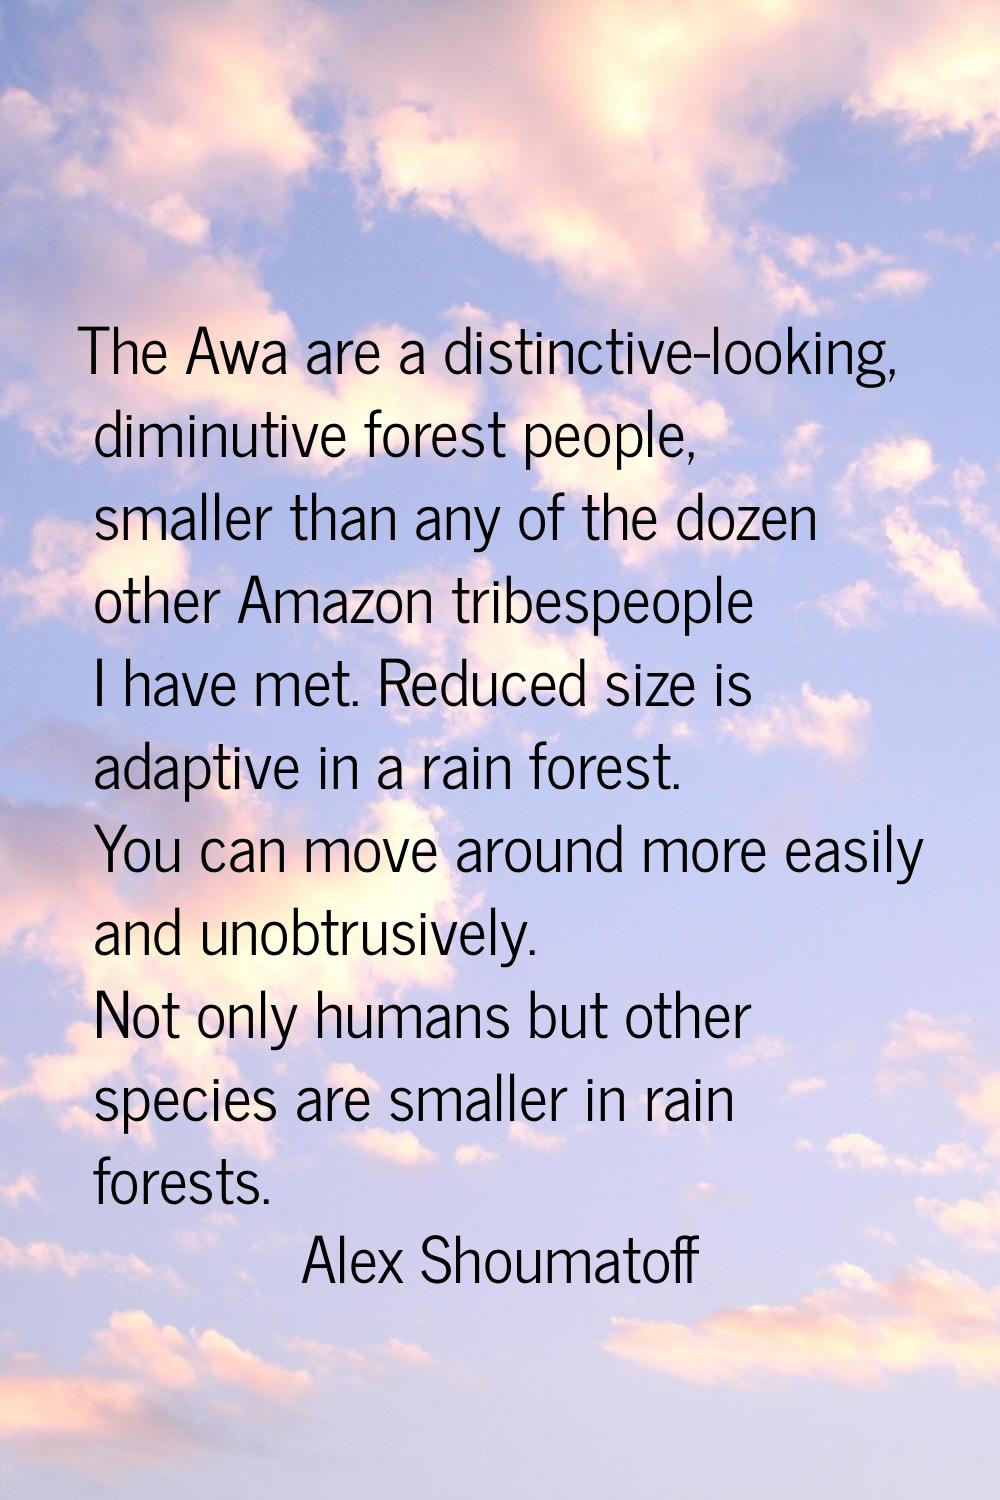 The Awa are a distinctive-looking, diminutive forest people, smaller than any of the dozen other Am